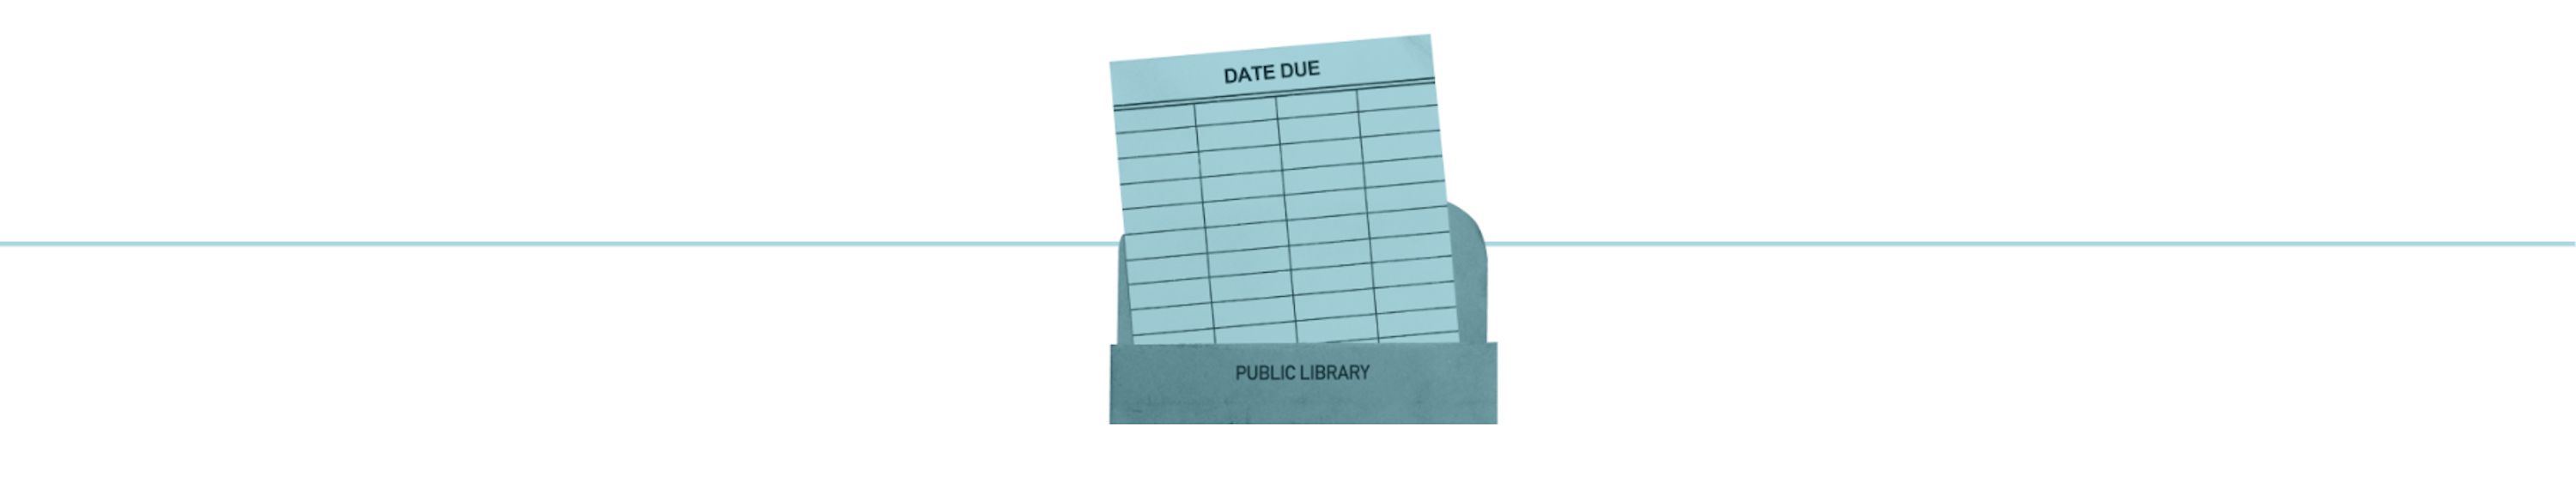 A divider graphic featuring a library checkout card.